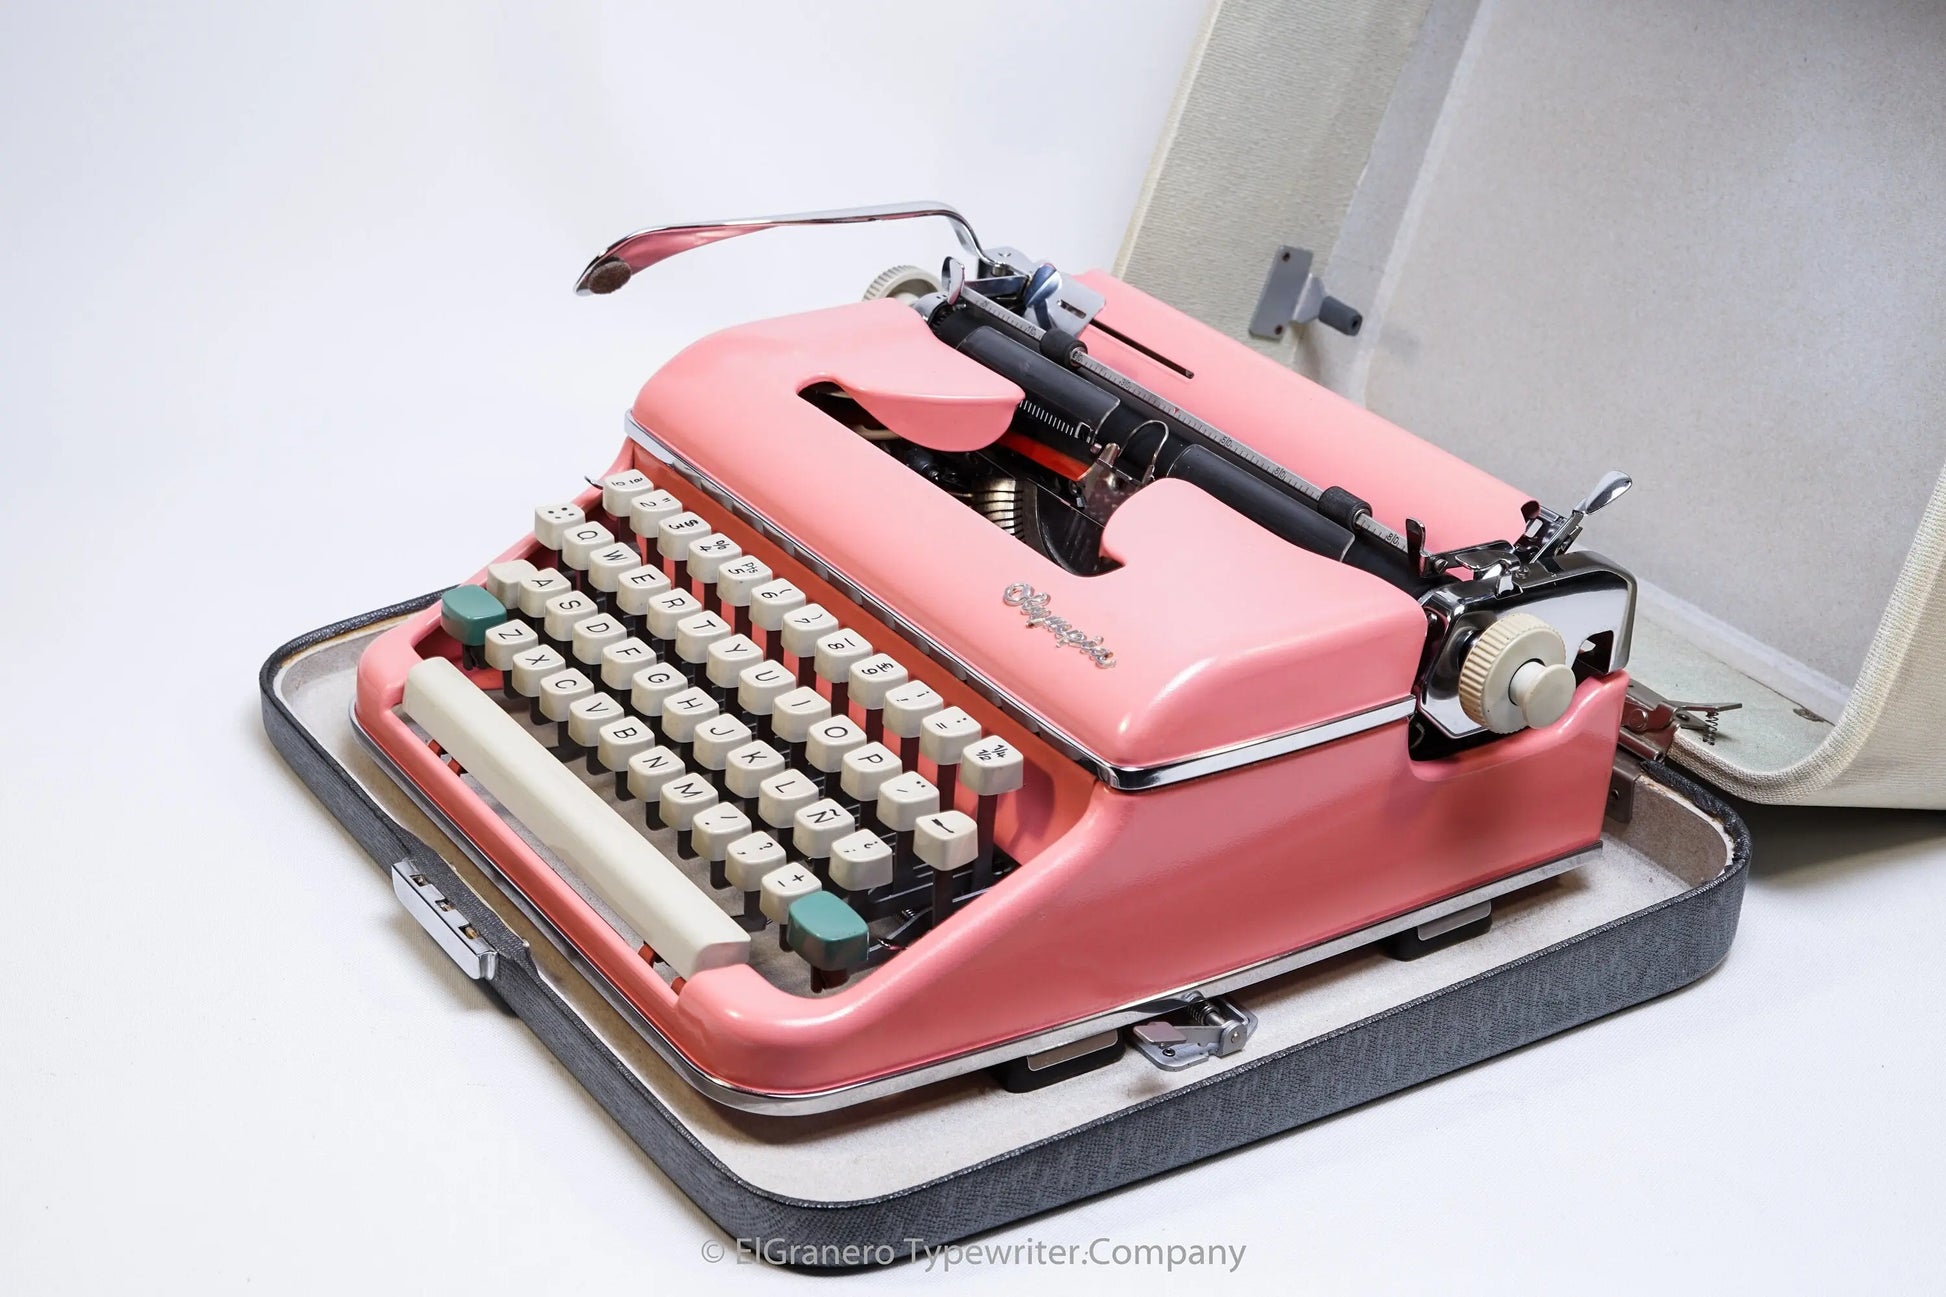 Limited Edition Olympia SM2/3 Flamingo Pink Typewriter, Vintage, Manual Portable, Professionally Serviced by Typewriter.Company - ElGranero Typewriter.Company